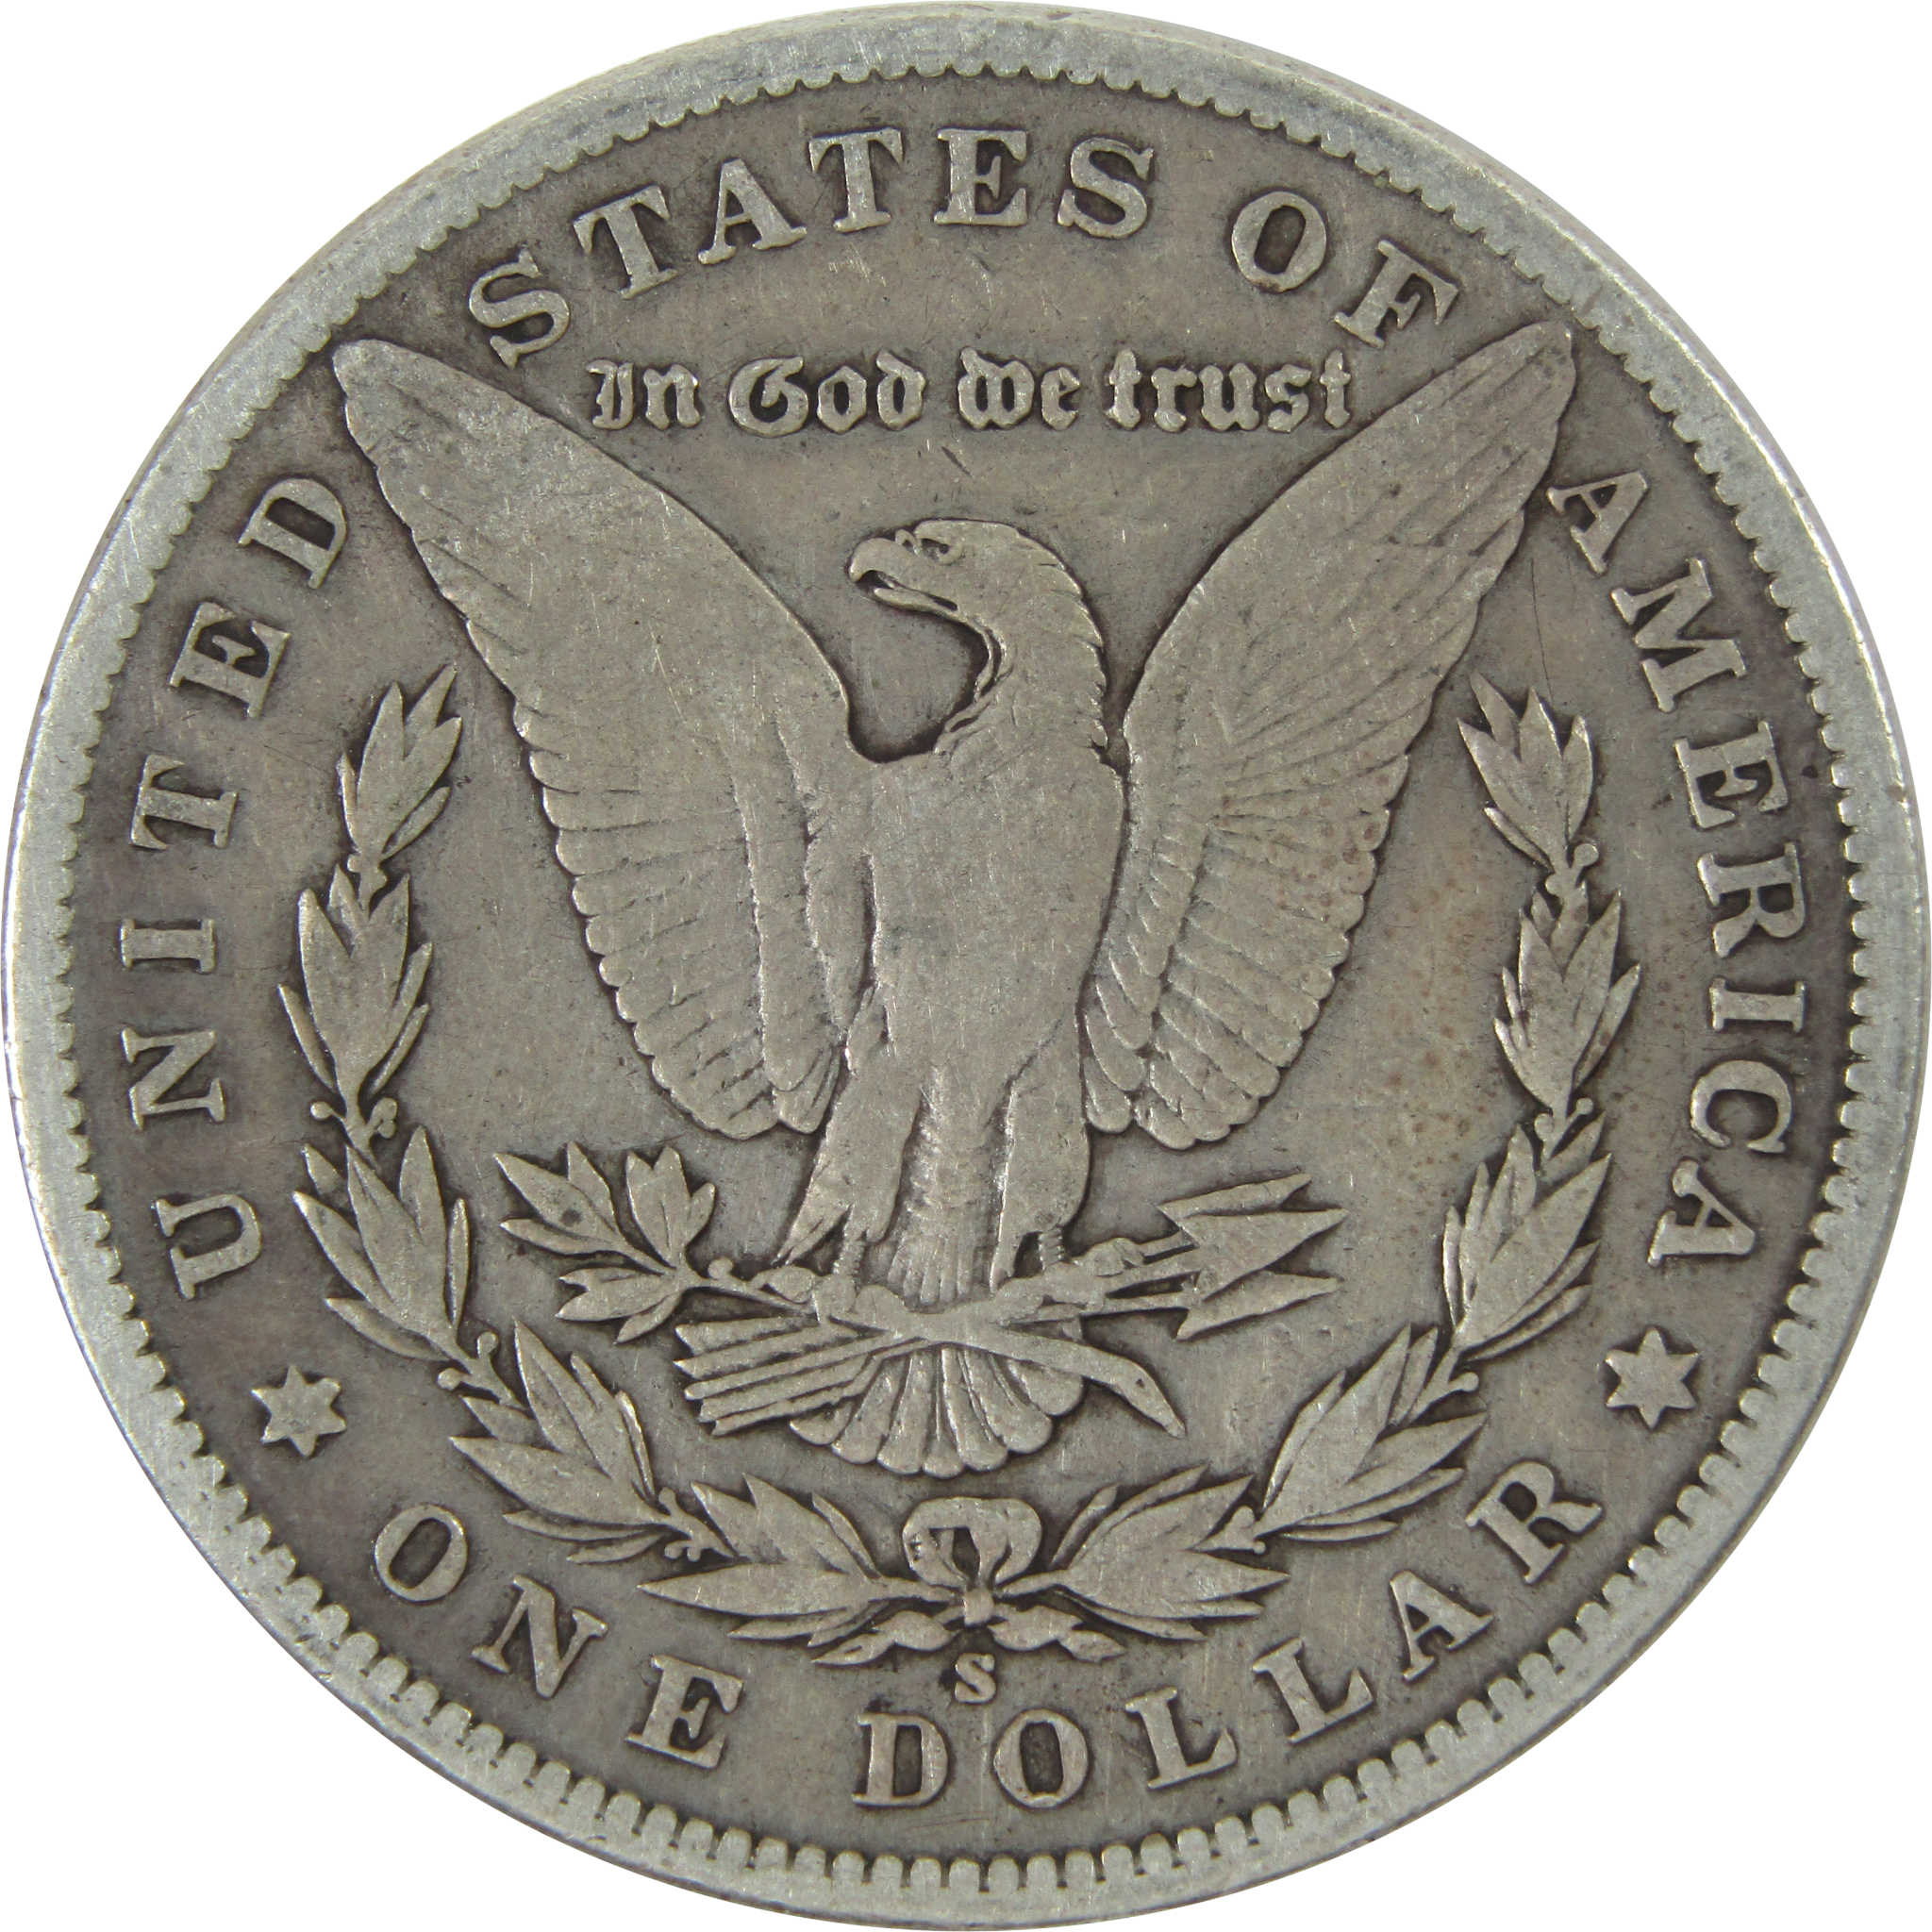 1900 S Morgan Dollar Very Good Details 1 oz Silver $1 Coin SKU:CPC6896 - Morgan coin - Morgan silver dollar - Morgan silver dollar for sale - Profile Coins &amp; Collectibles